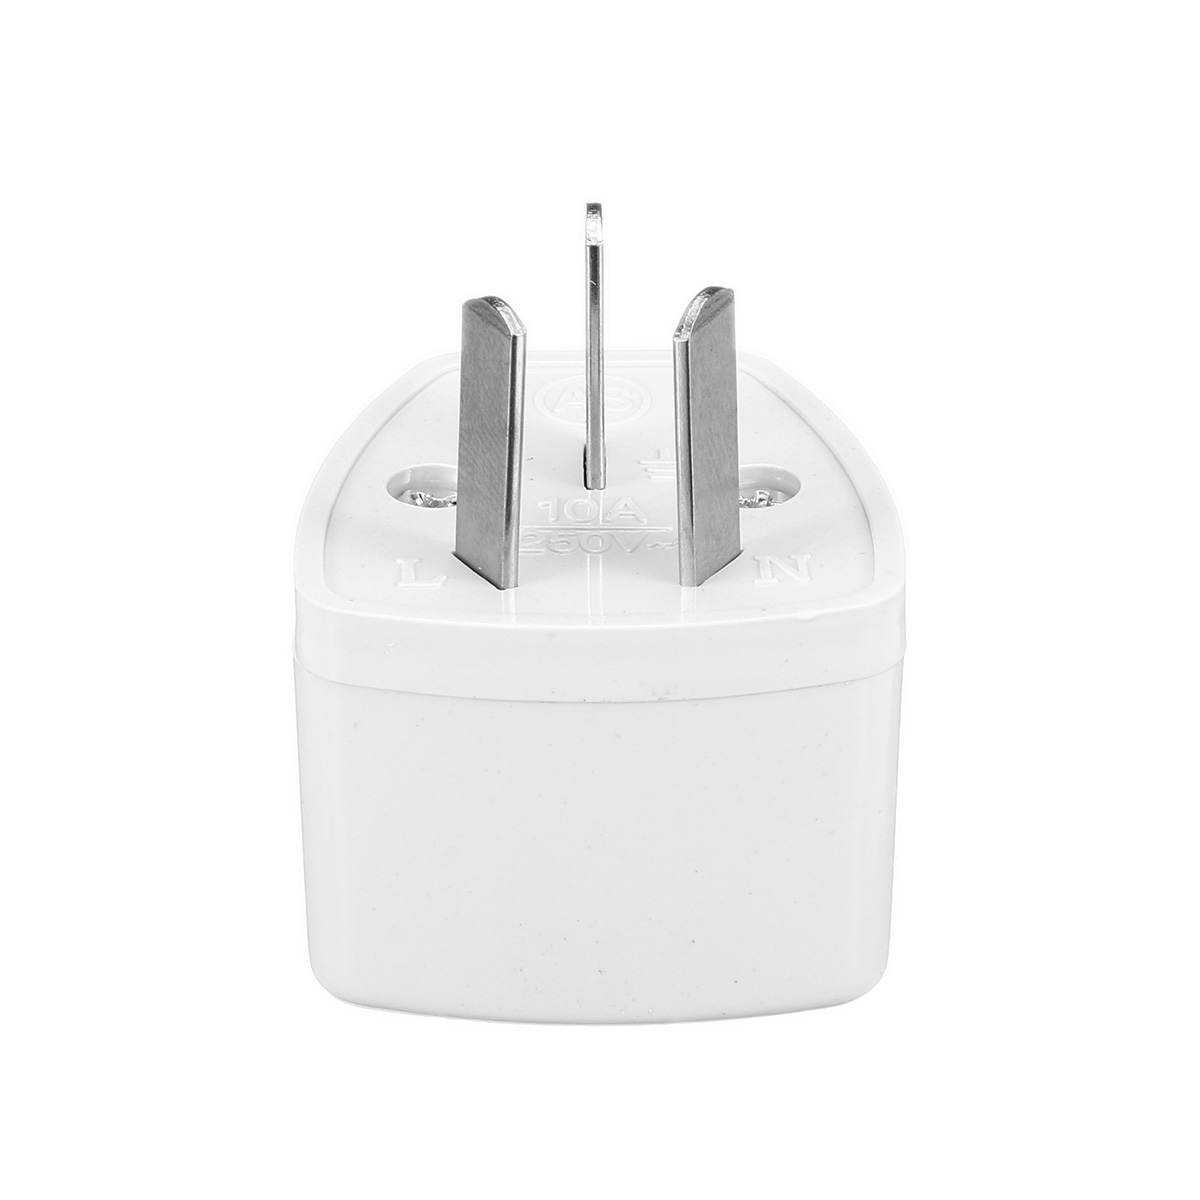 Find US UK EU to AU NZ New Zealand CN AC Power Plug Adapter Travel Converter for Sale on Gipsybee.com with cryptocurrencies